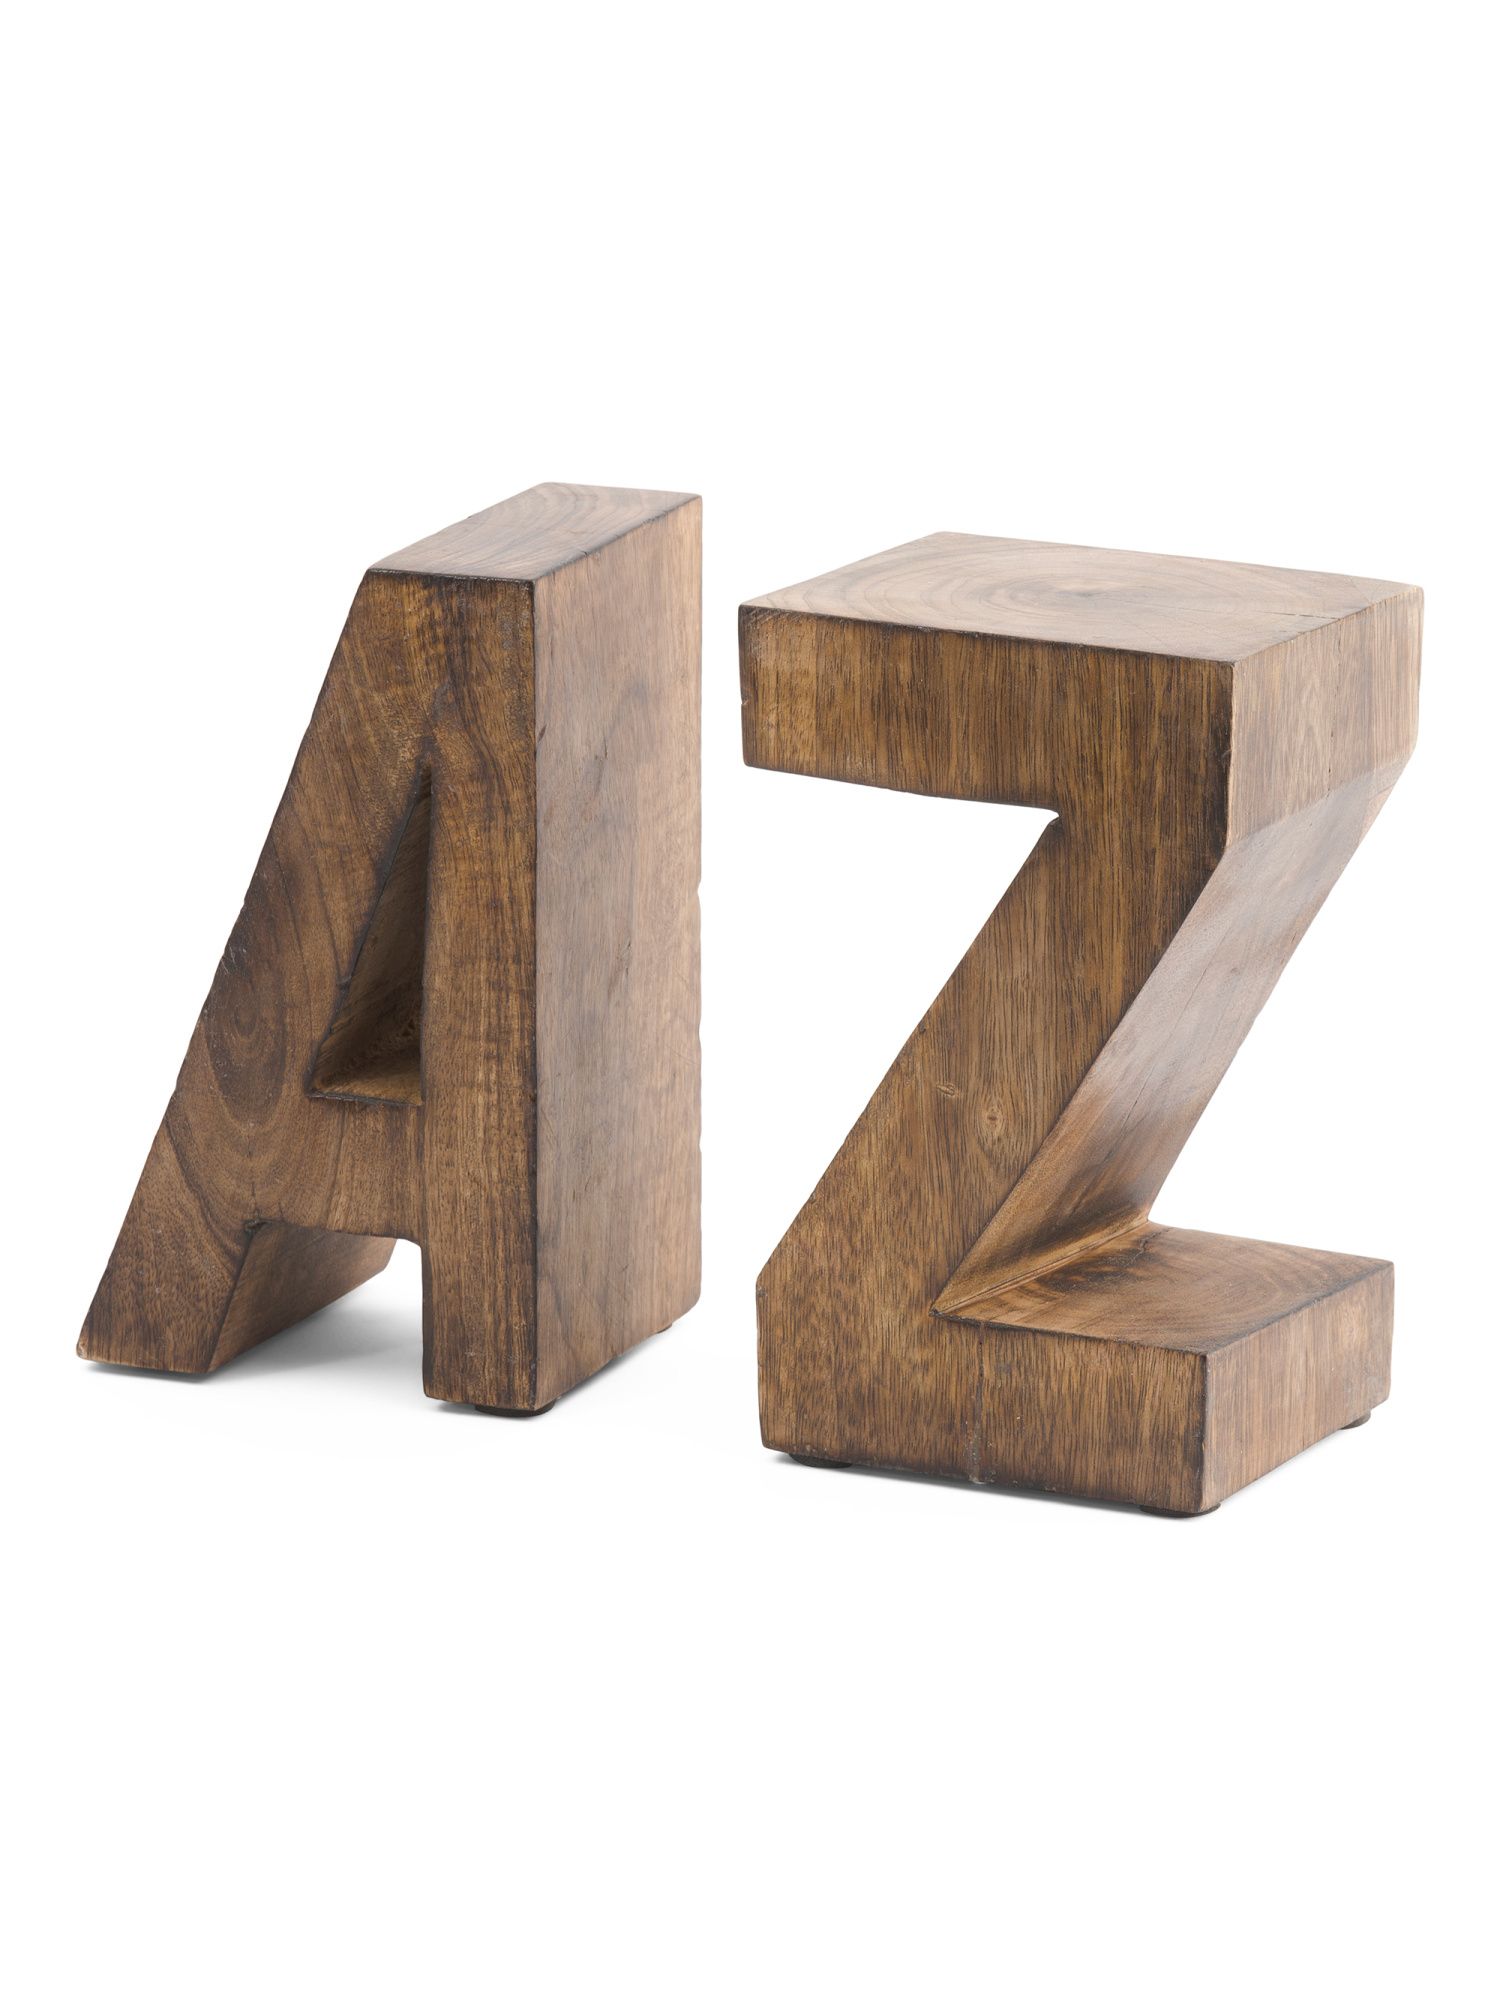 A To Z Wood Bookends | TJ Maxx